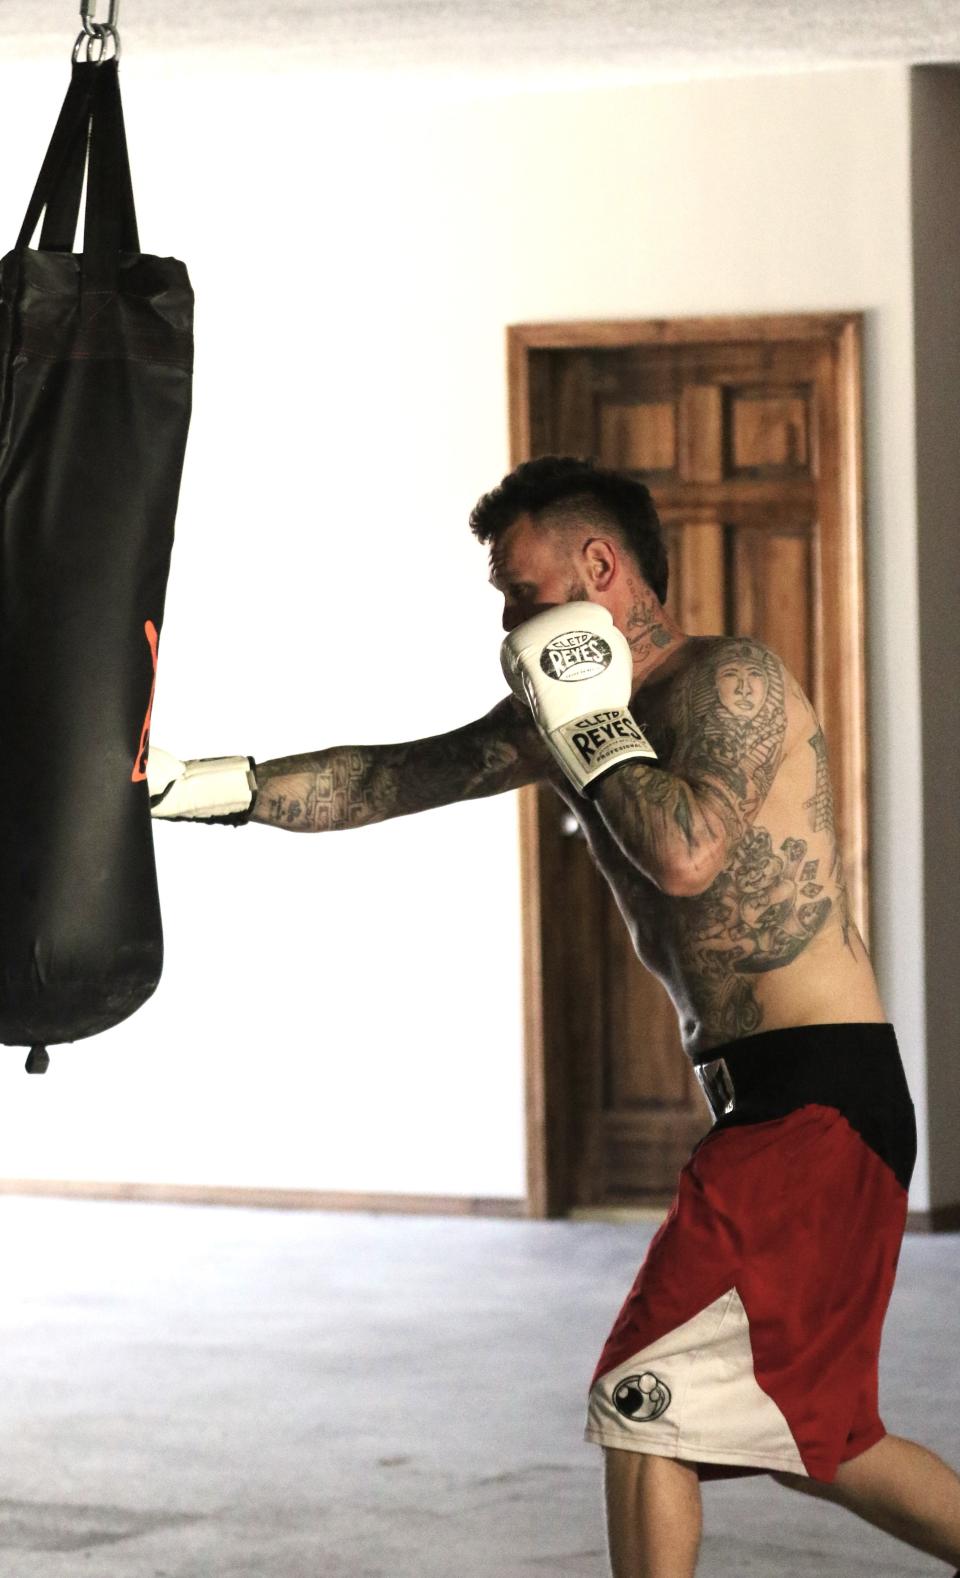 Brandon Alexander, Zanesville native, recently won the vacant Universal Boxing Organization (UBO) International Middleweight title. He is currently training for his next bout in June, where he will fight for the UBO Inter-Continental title in Colombia.